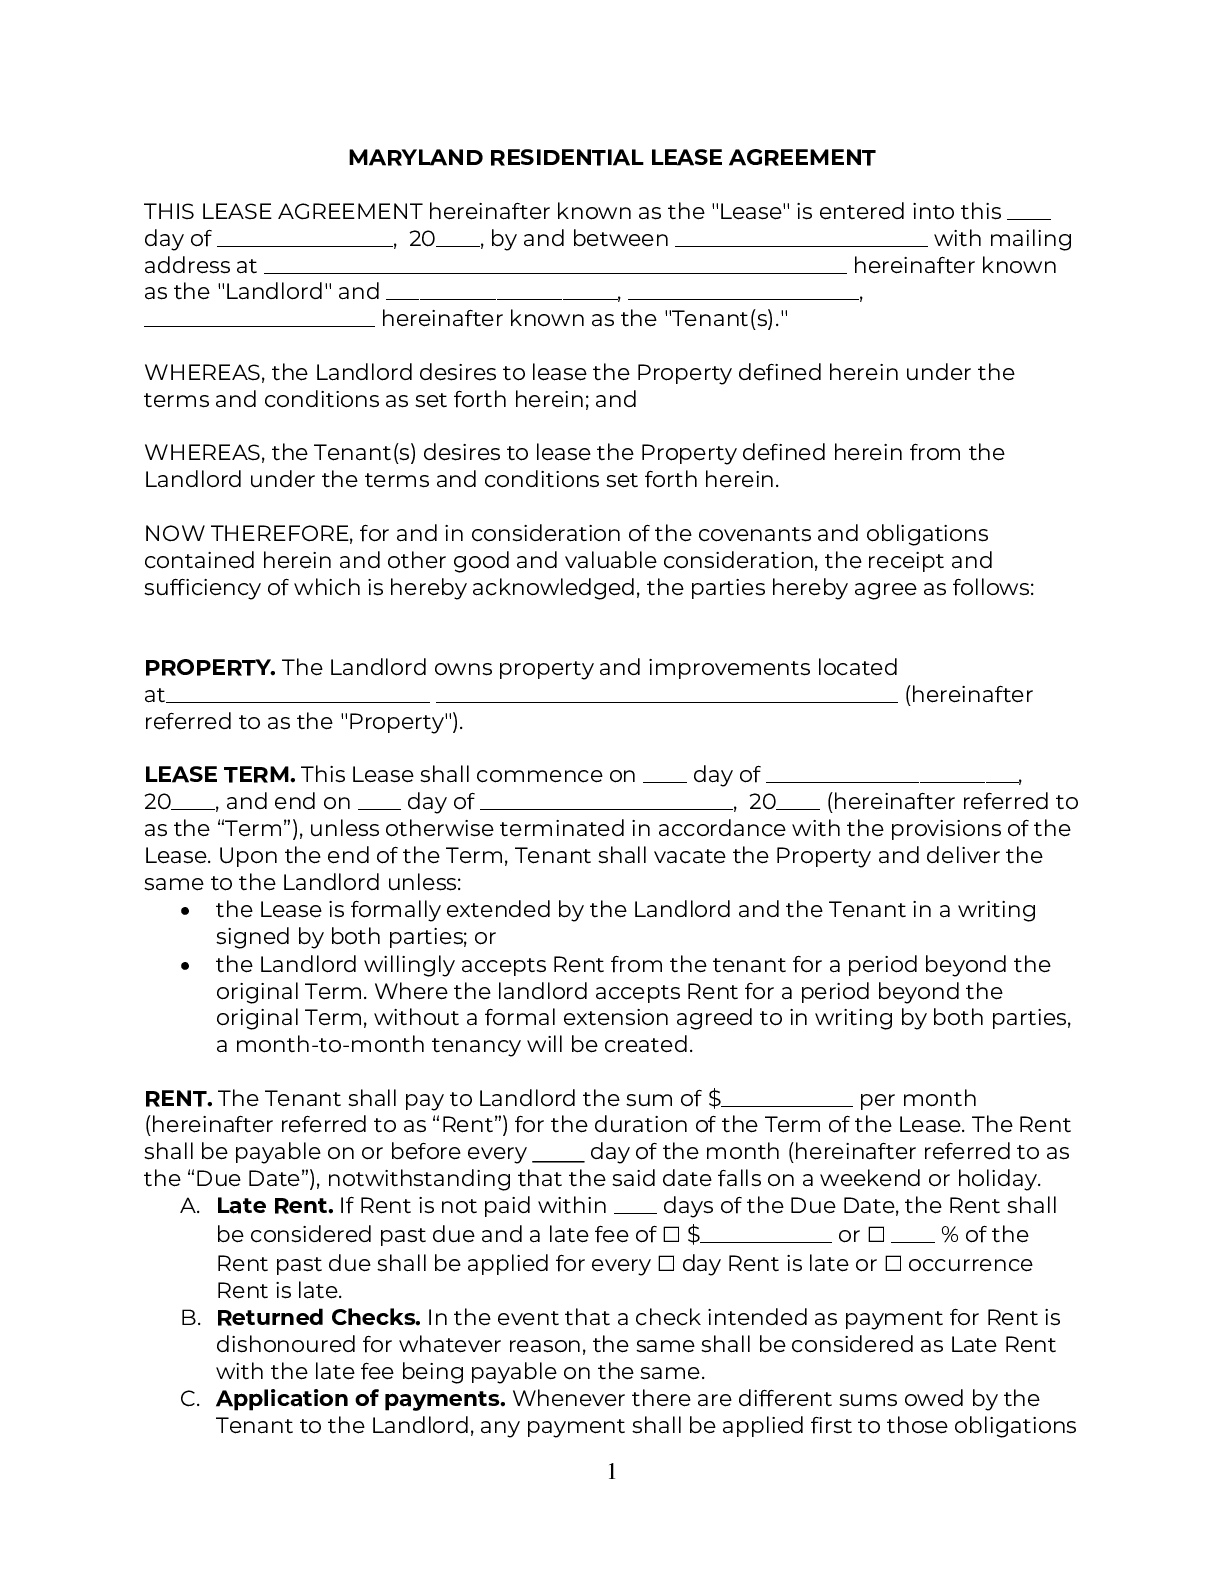 Maryland Lease Agreement (Free) 2021 Official PDF & Word